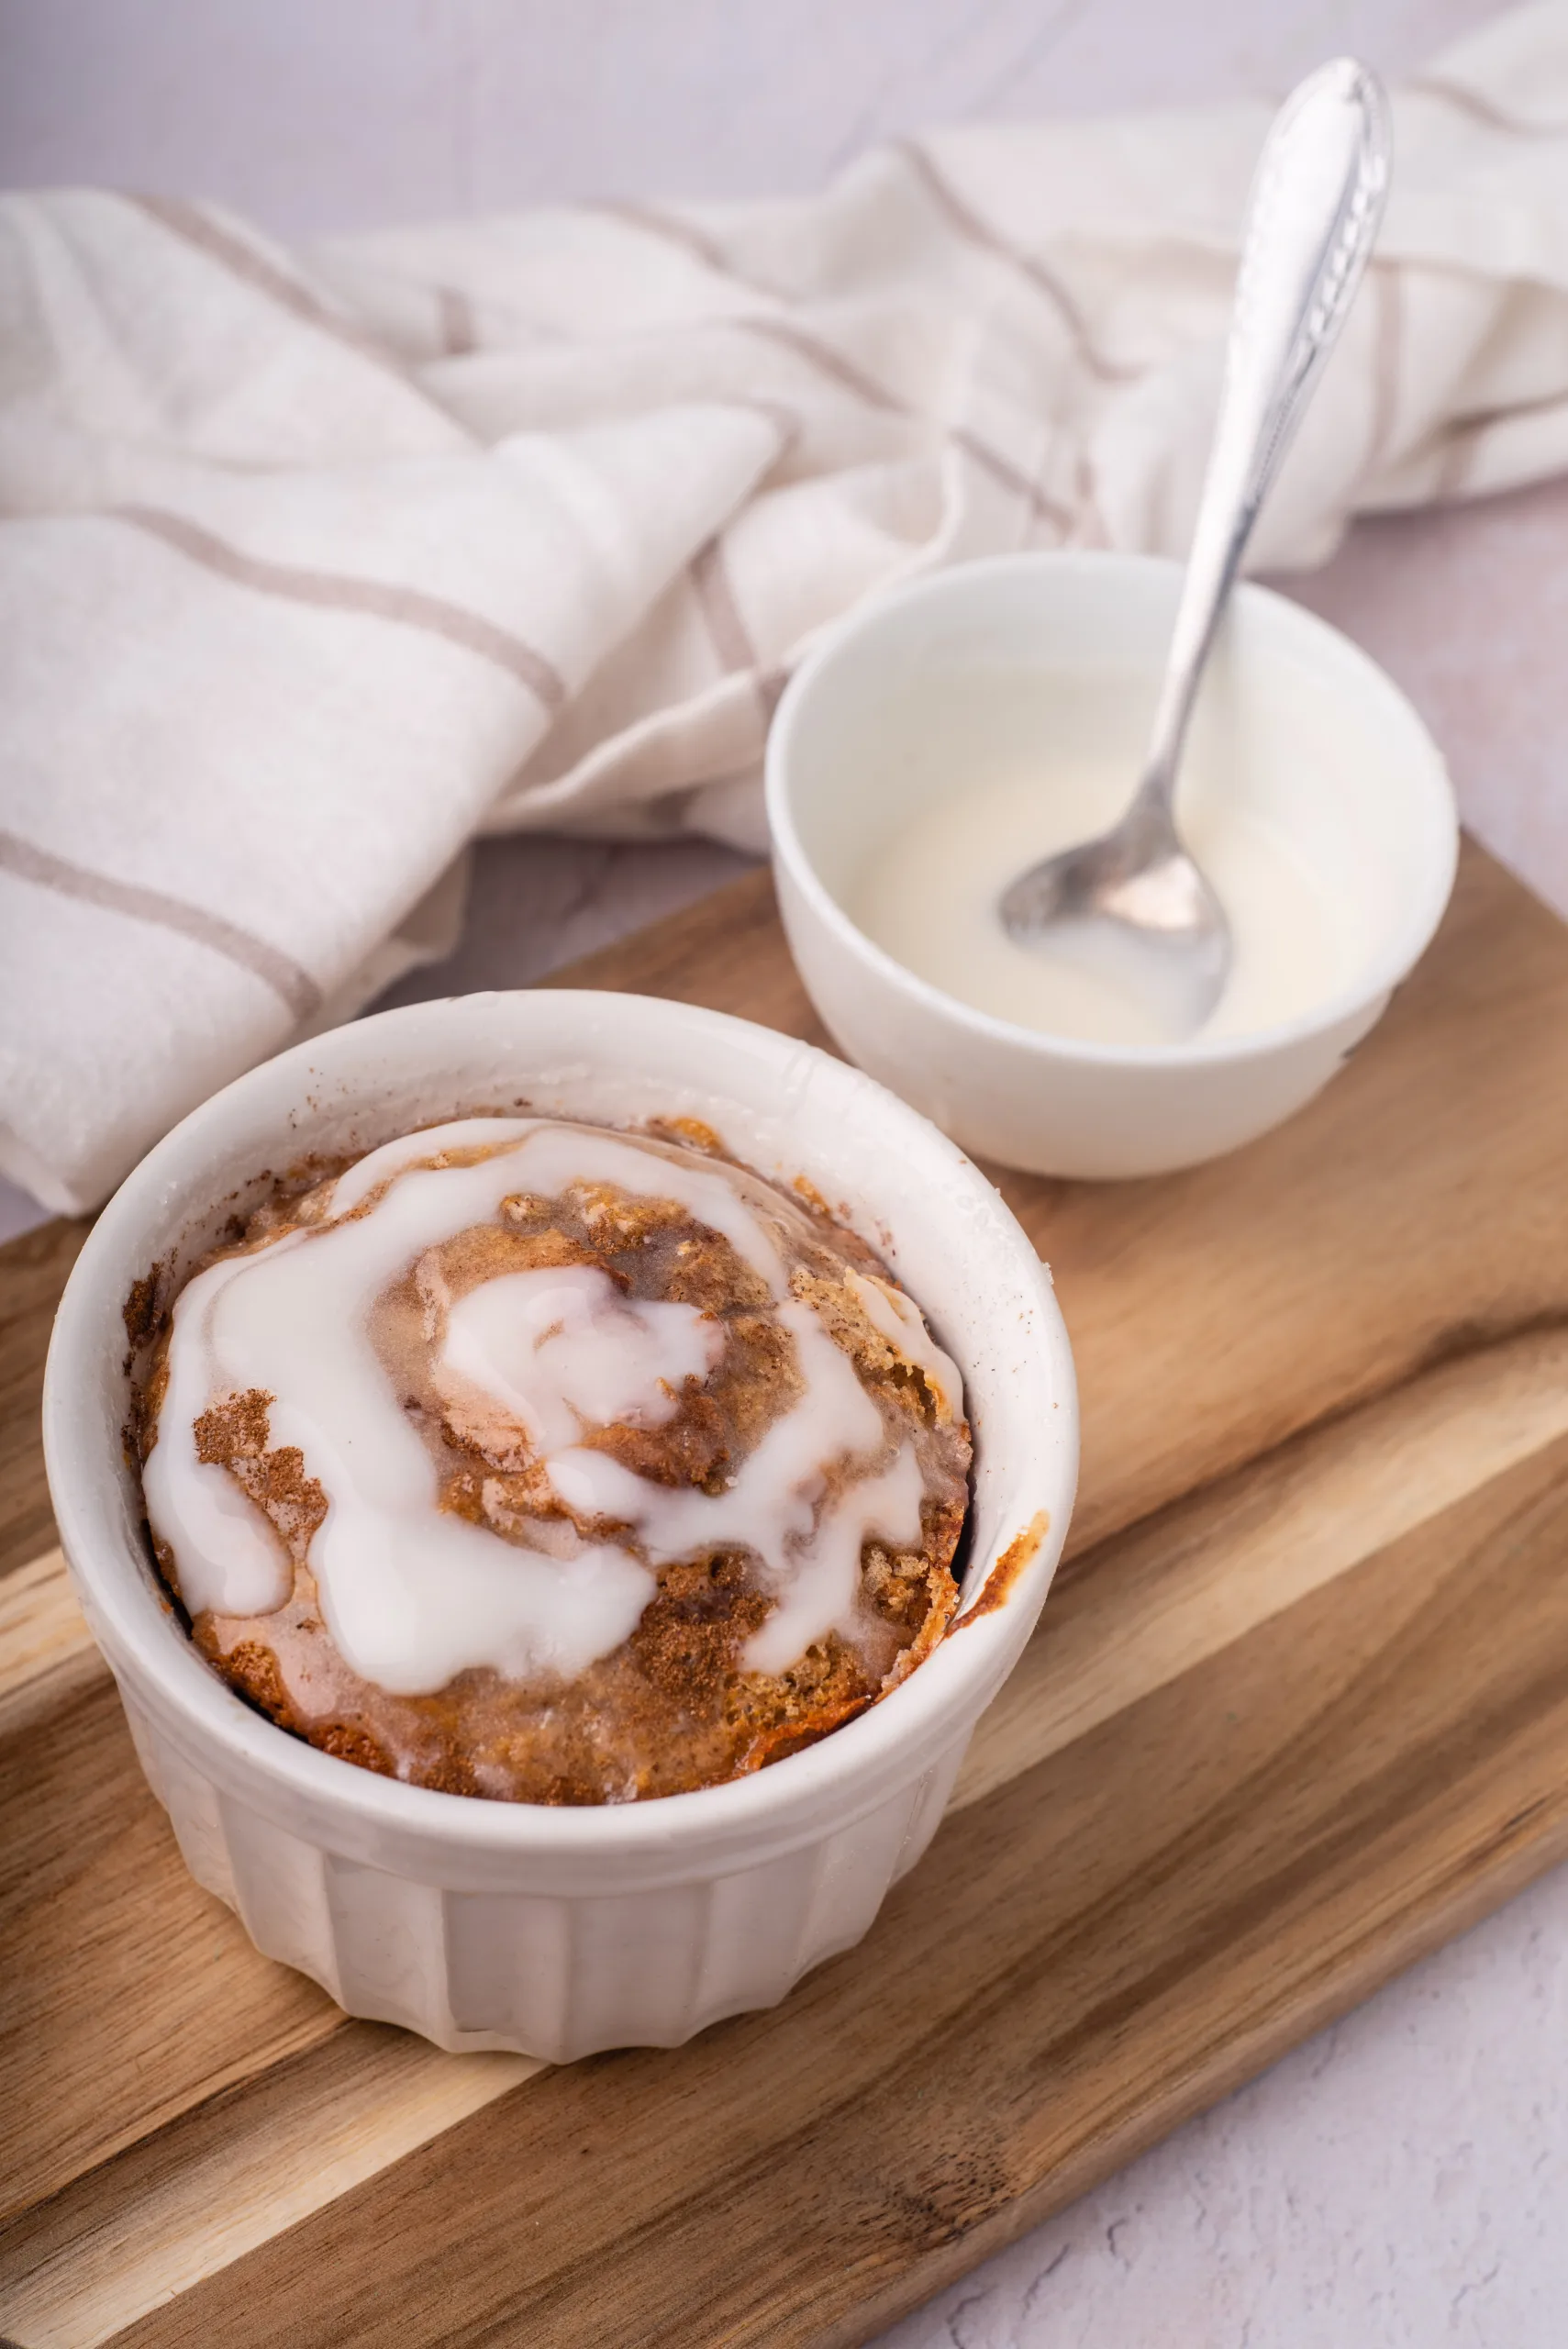 cinnamon roll baked oats mug cake in white ramekins with drizzled icing